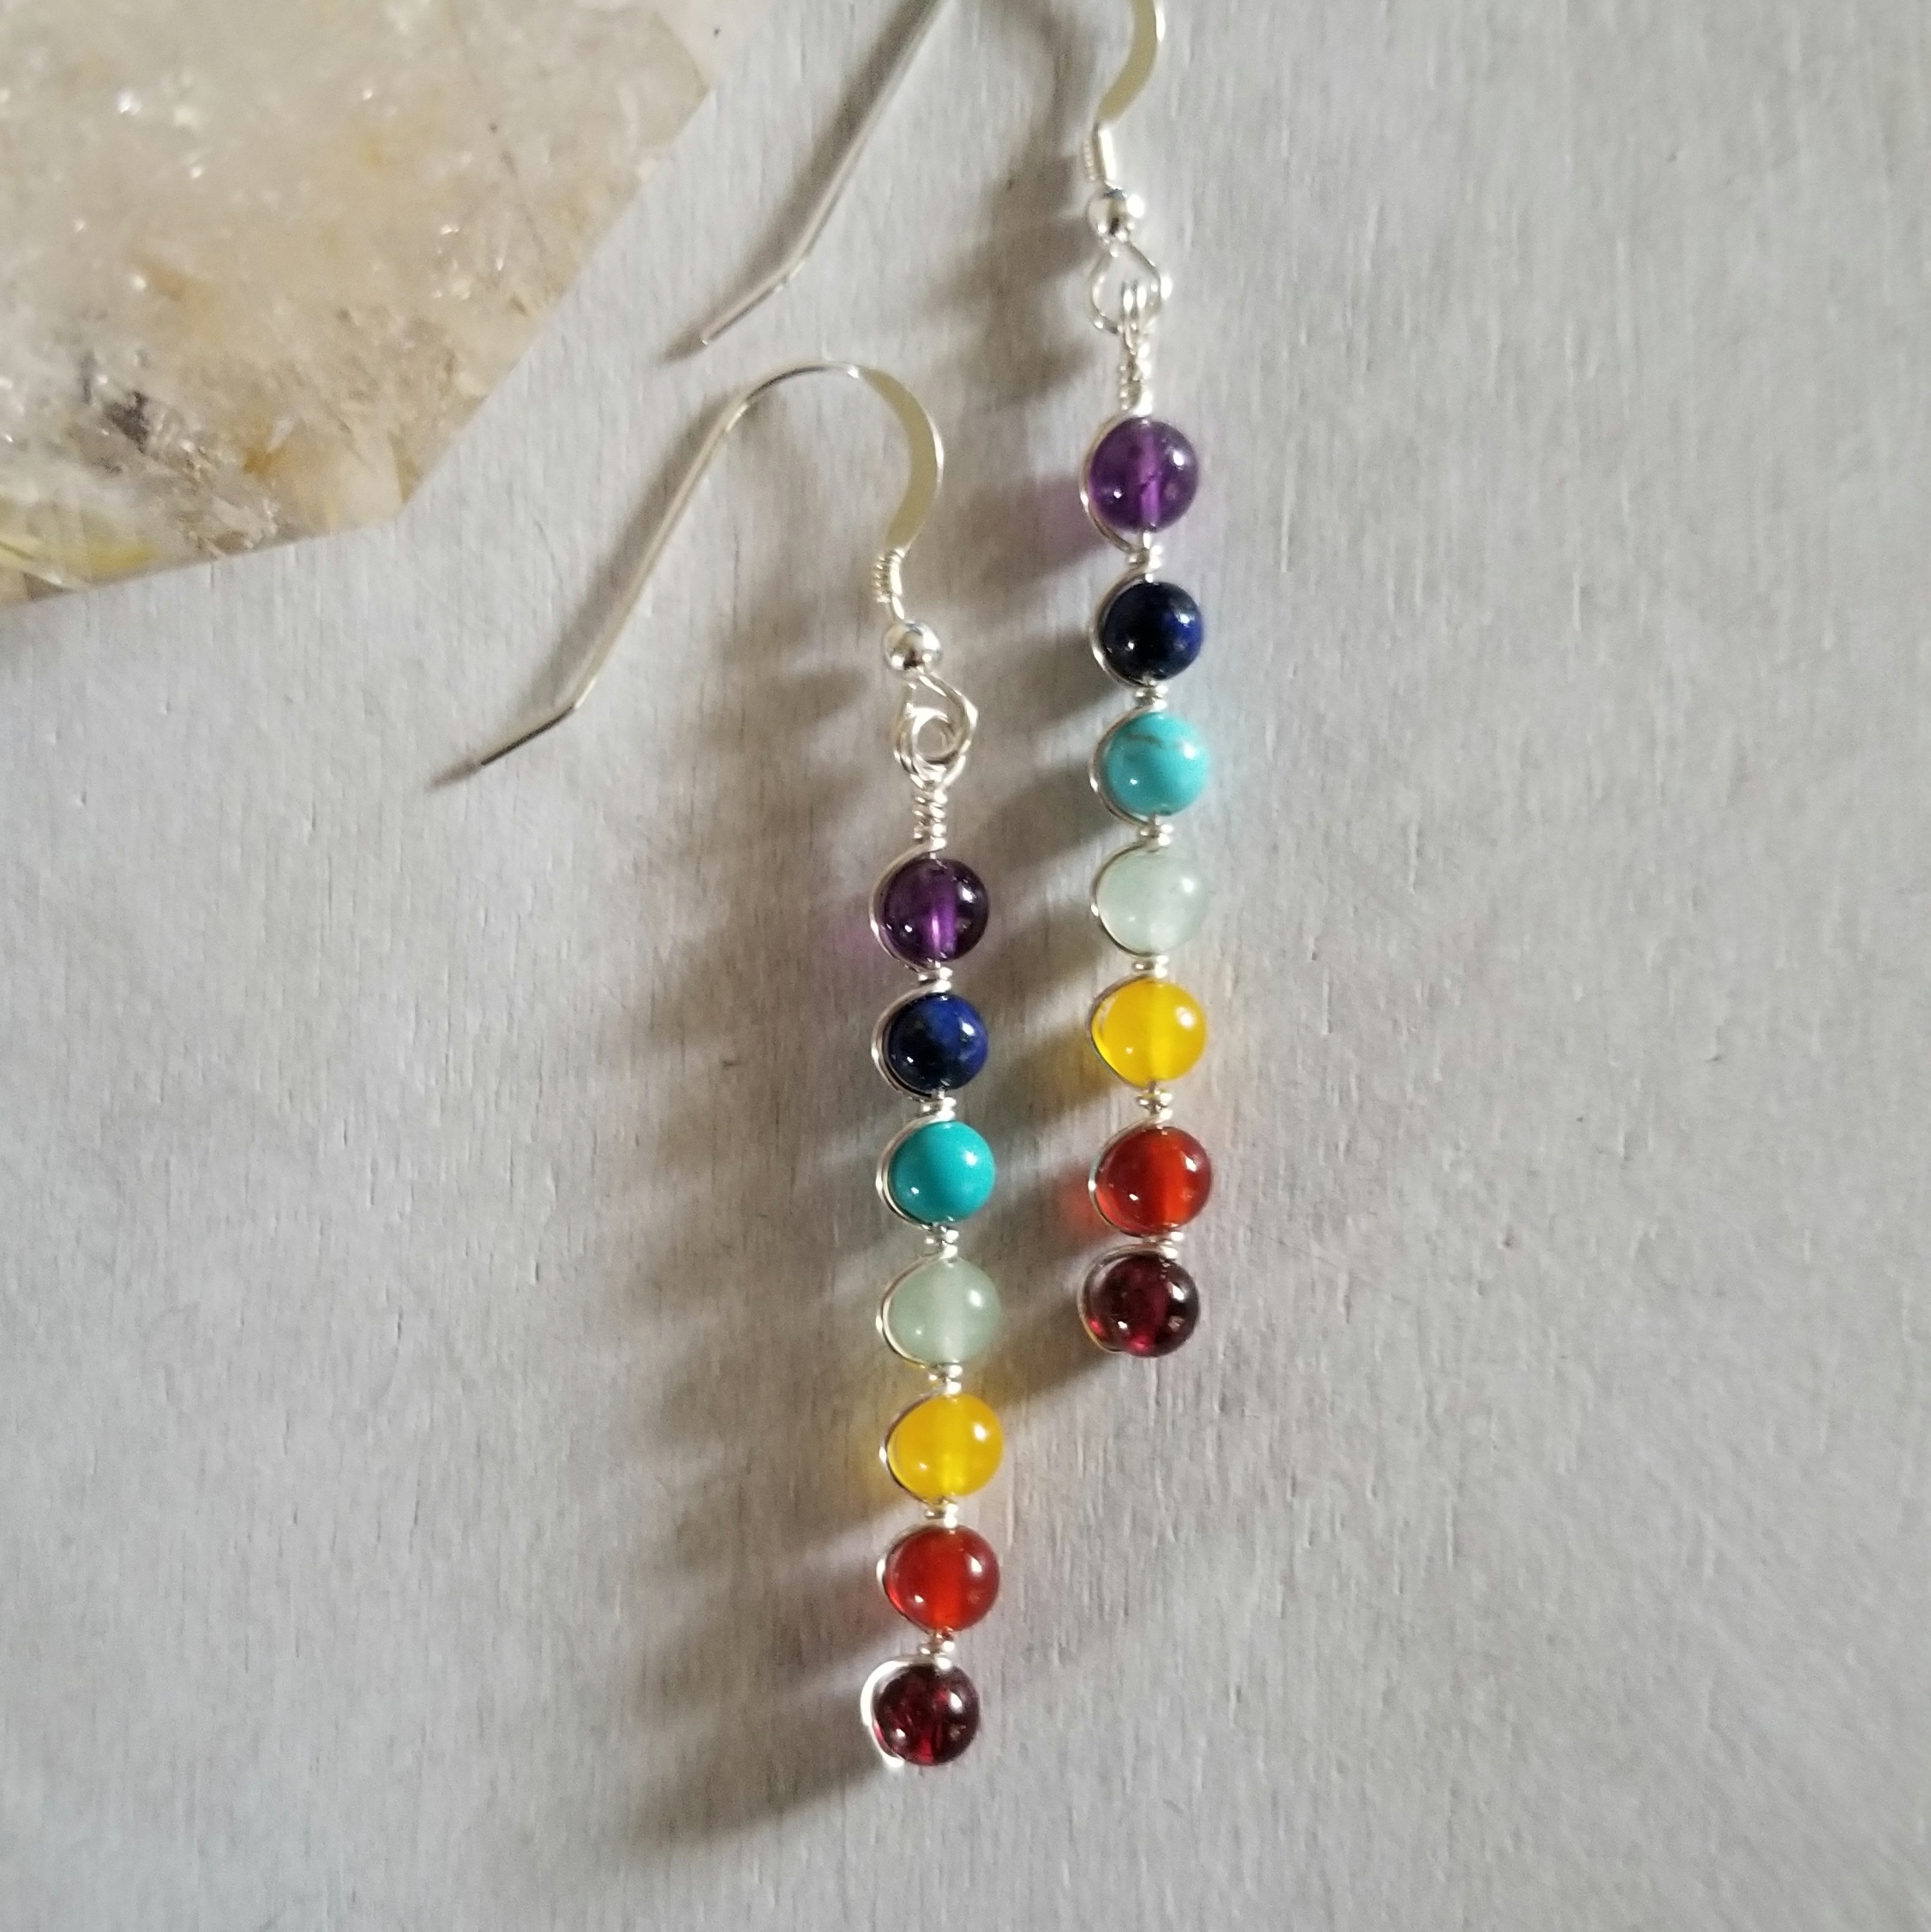 Seven Chakra Sterling Silver Earrings - Solstice LTD - Jewelry and More